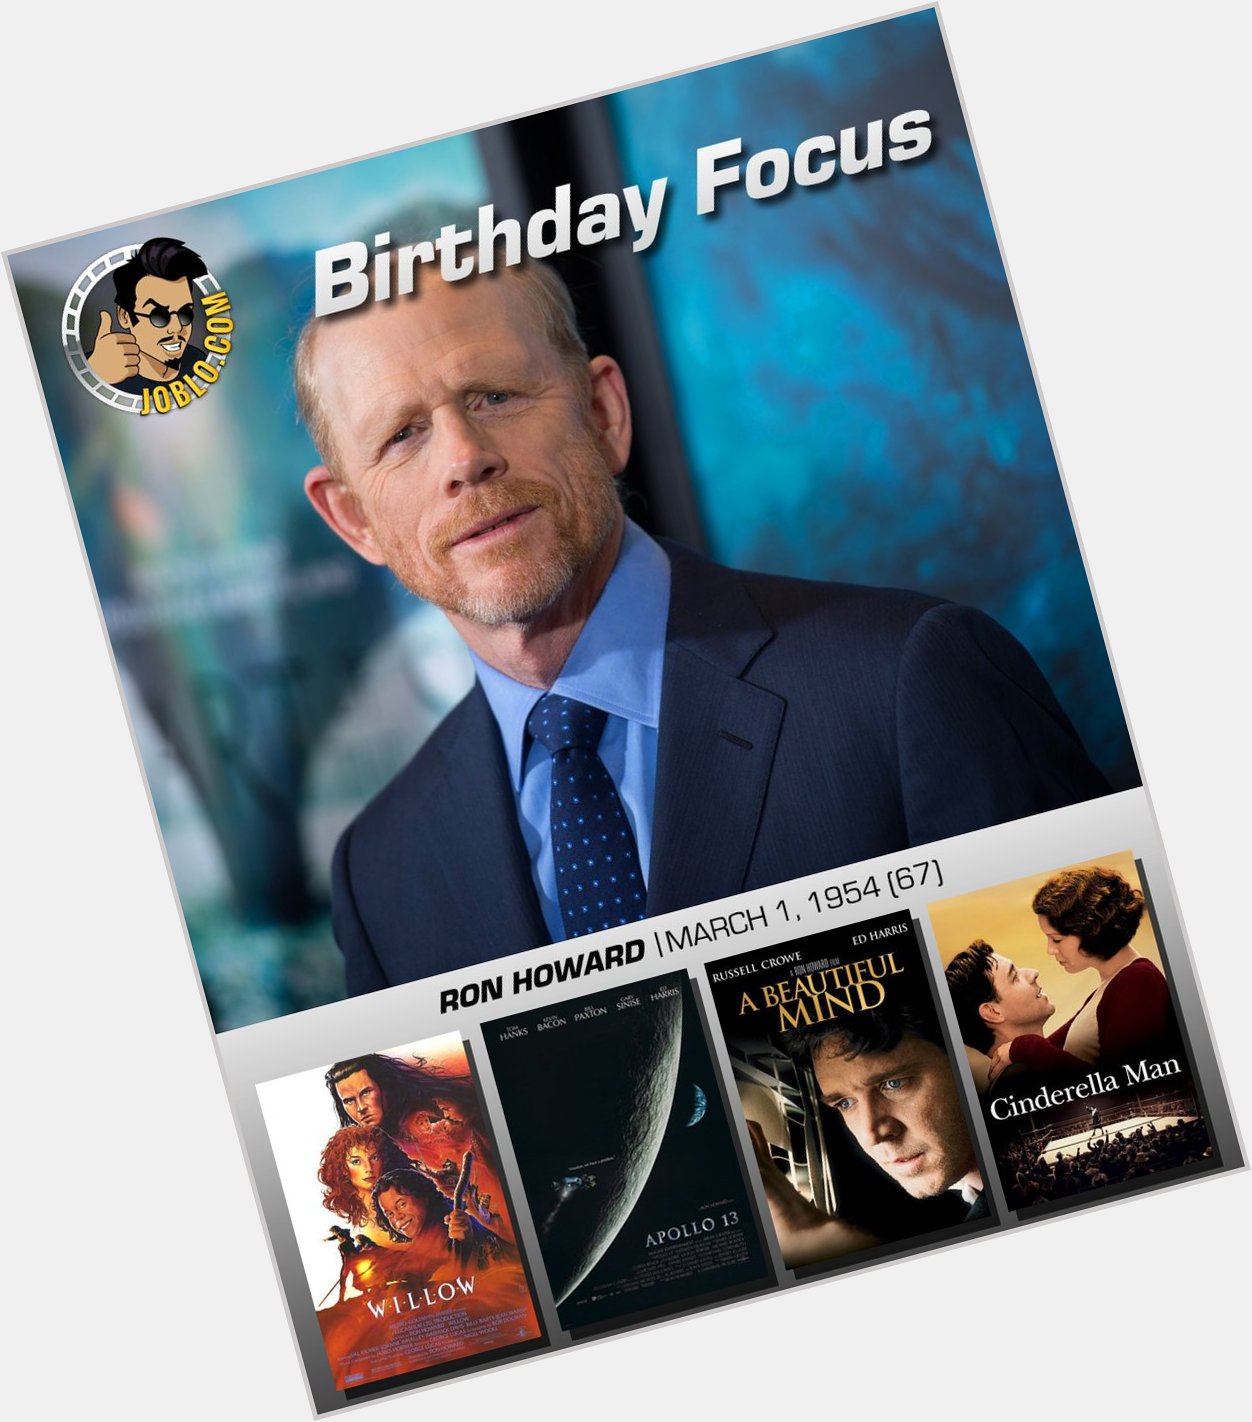 Happy 67 birthday to Ron Howard!

What is your favorite film of his? 